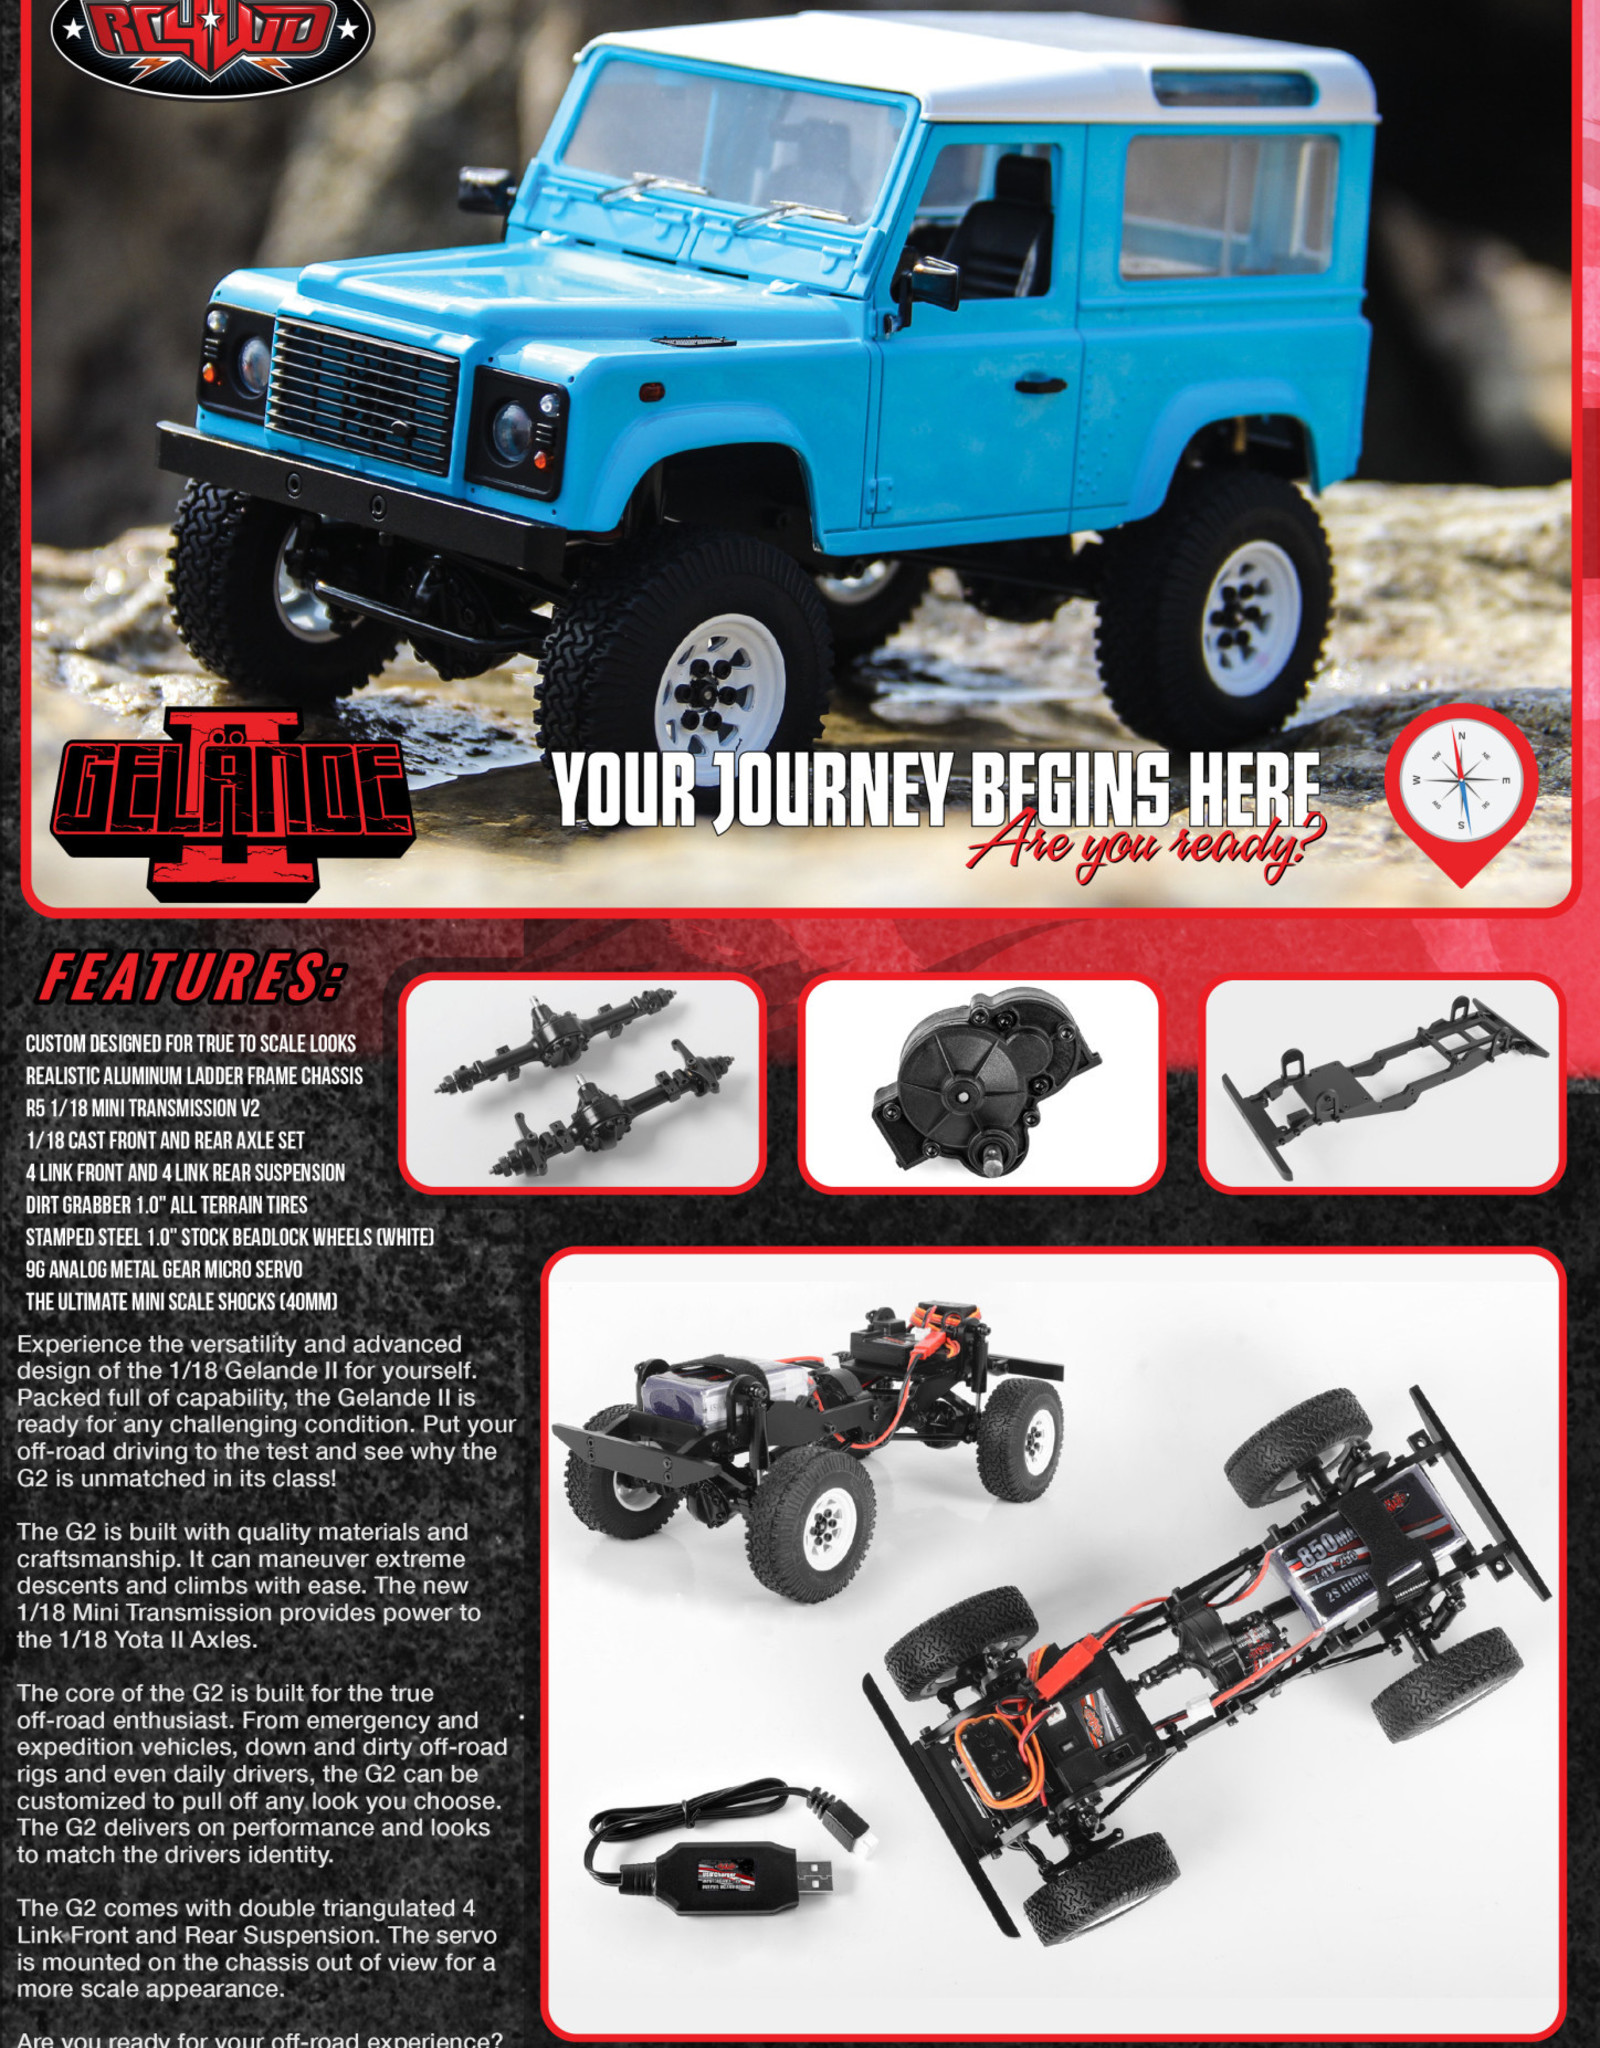 rc 4wd off road